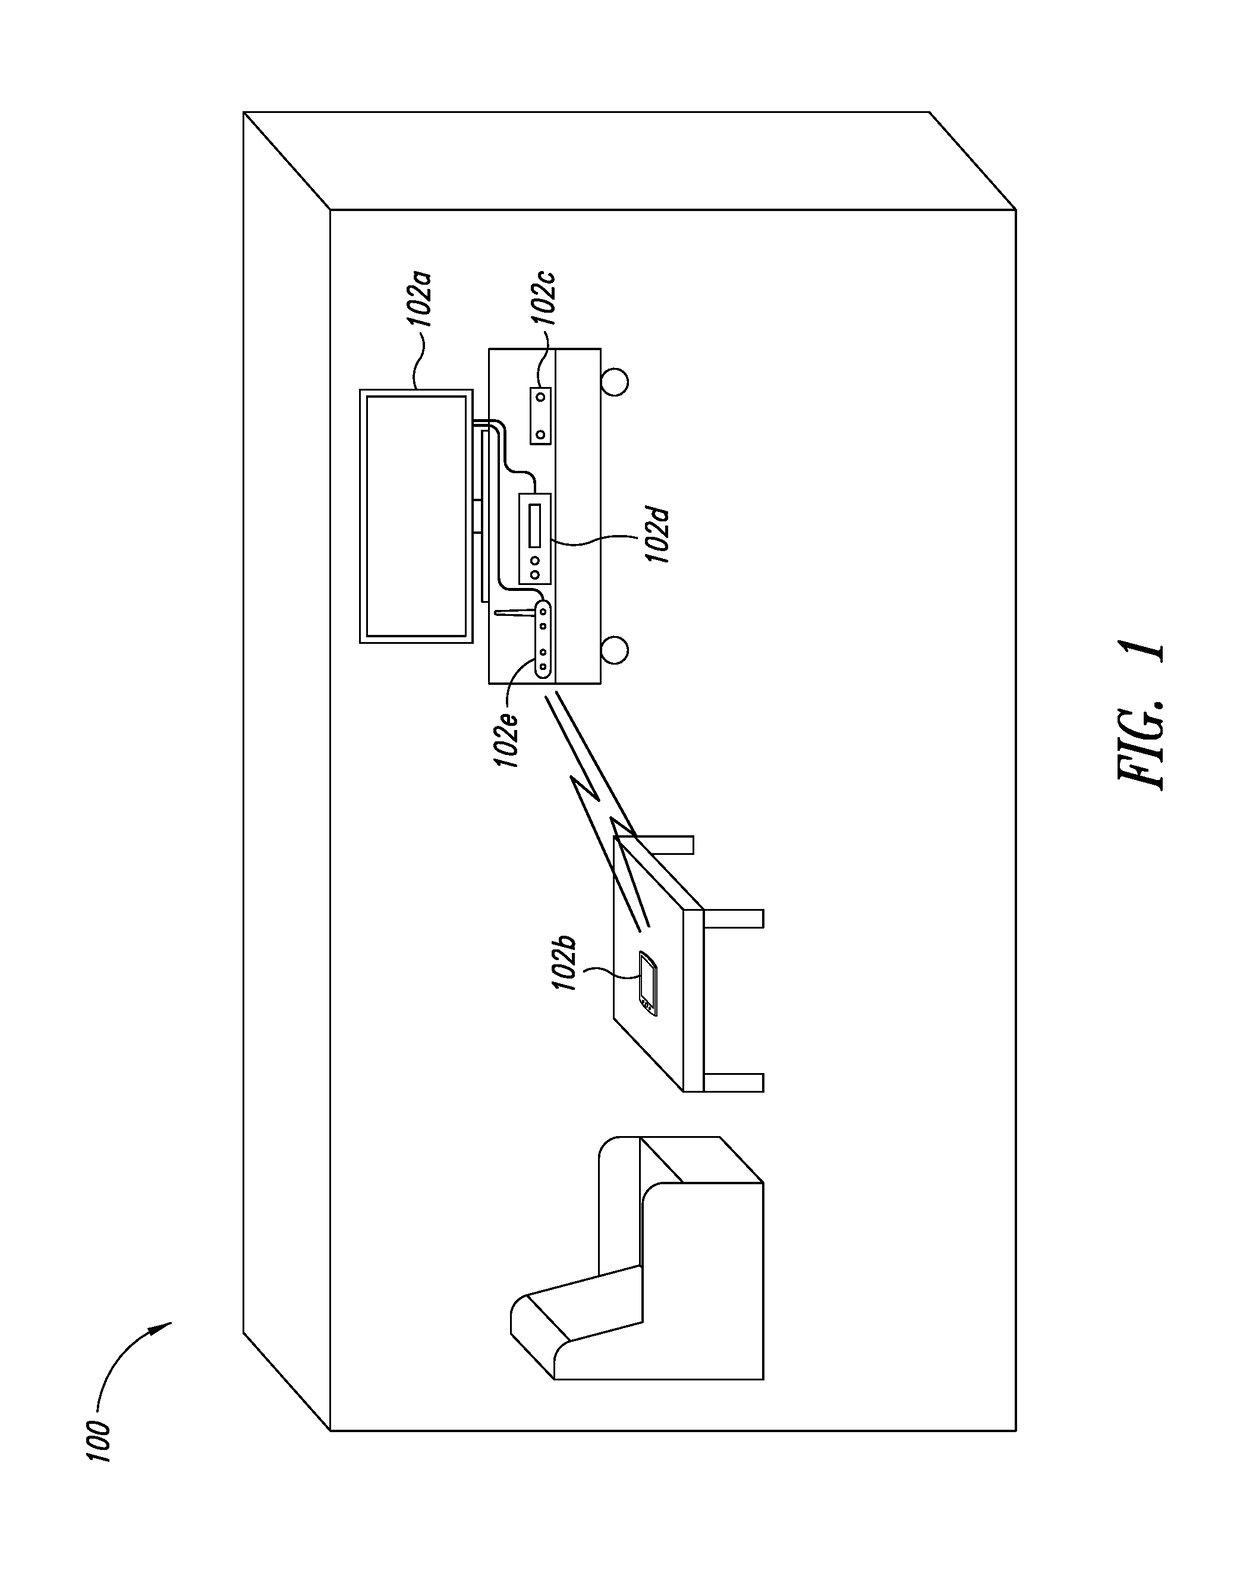 Multipath switching using per-hop virtual local area network classification